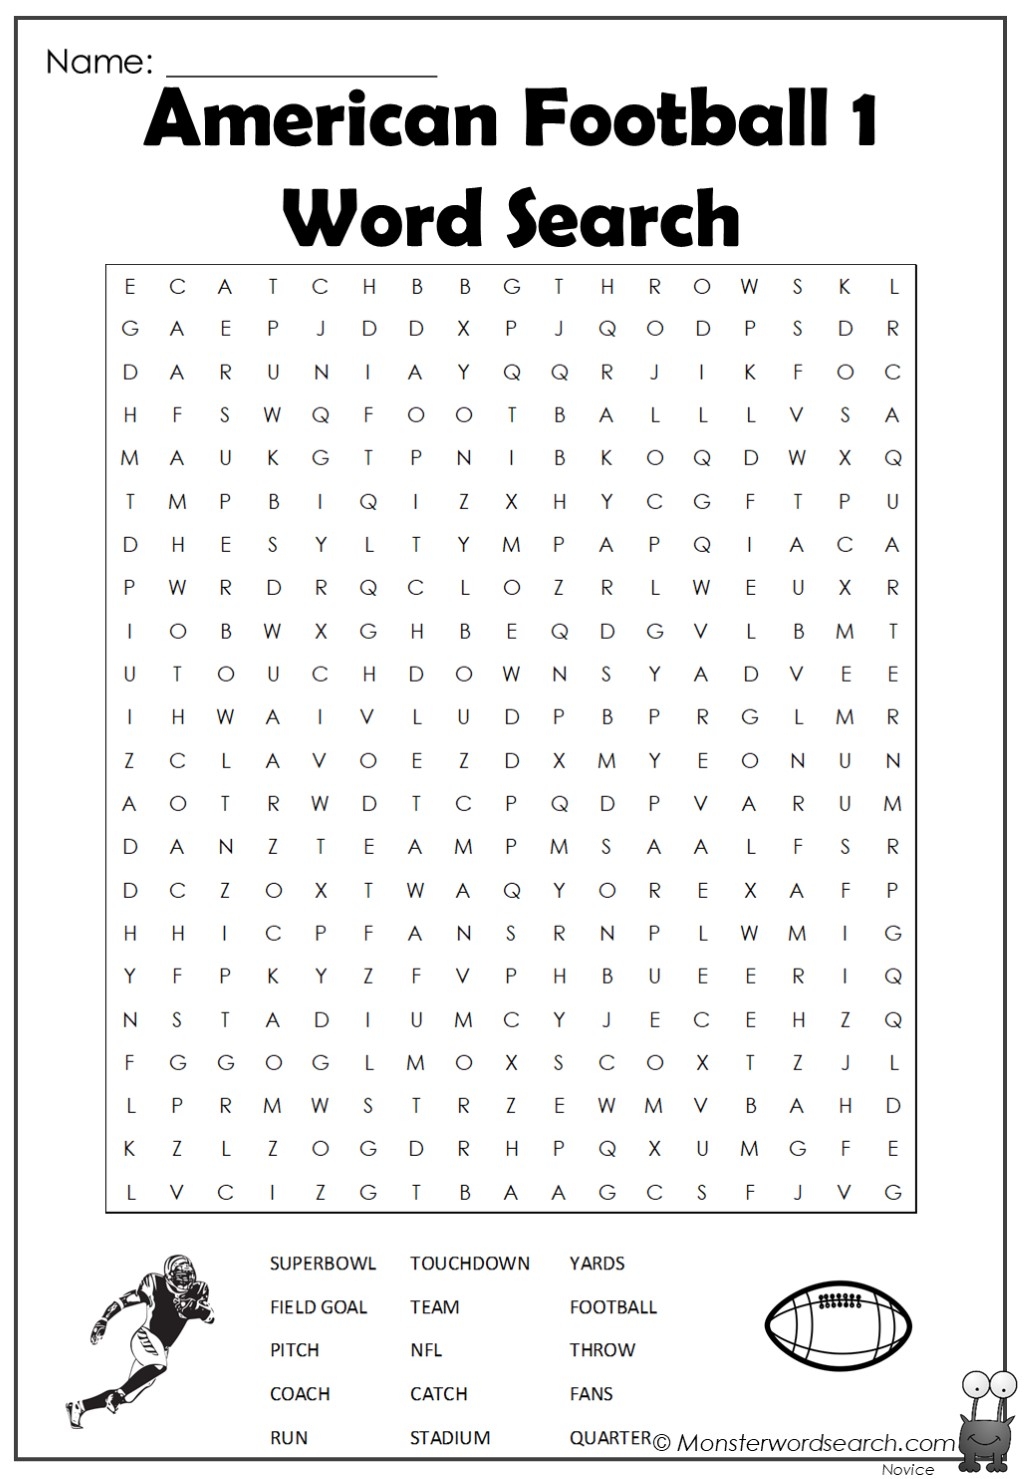 American Football 1 Word Search Monster Word Search